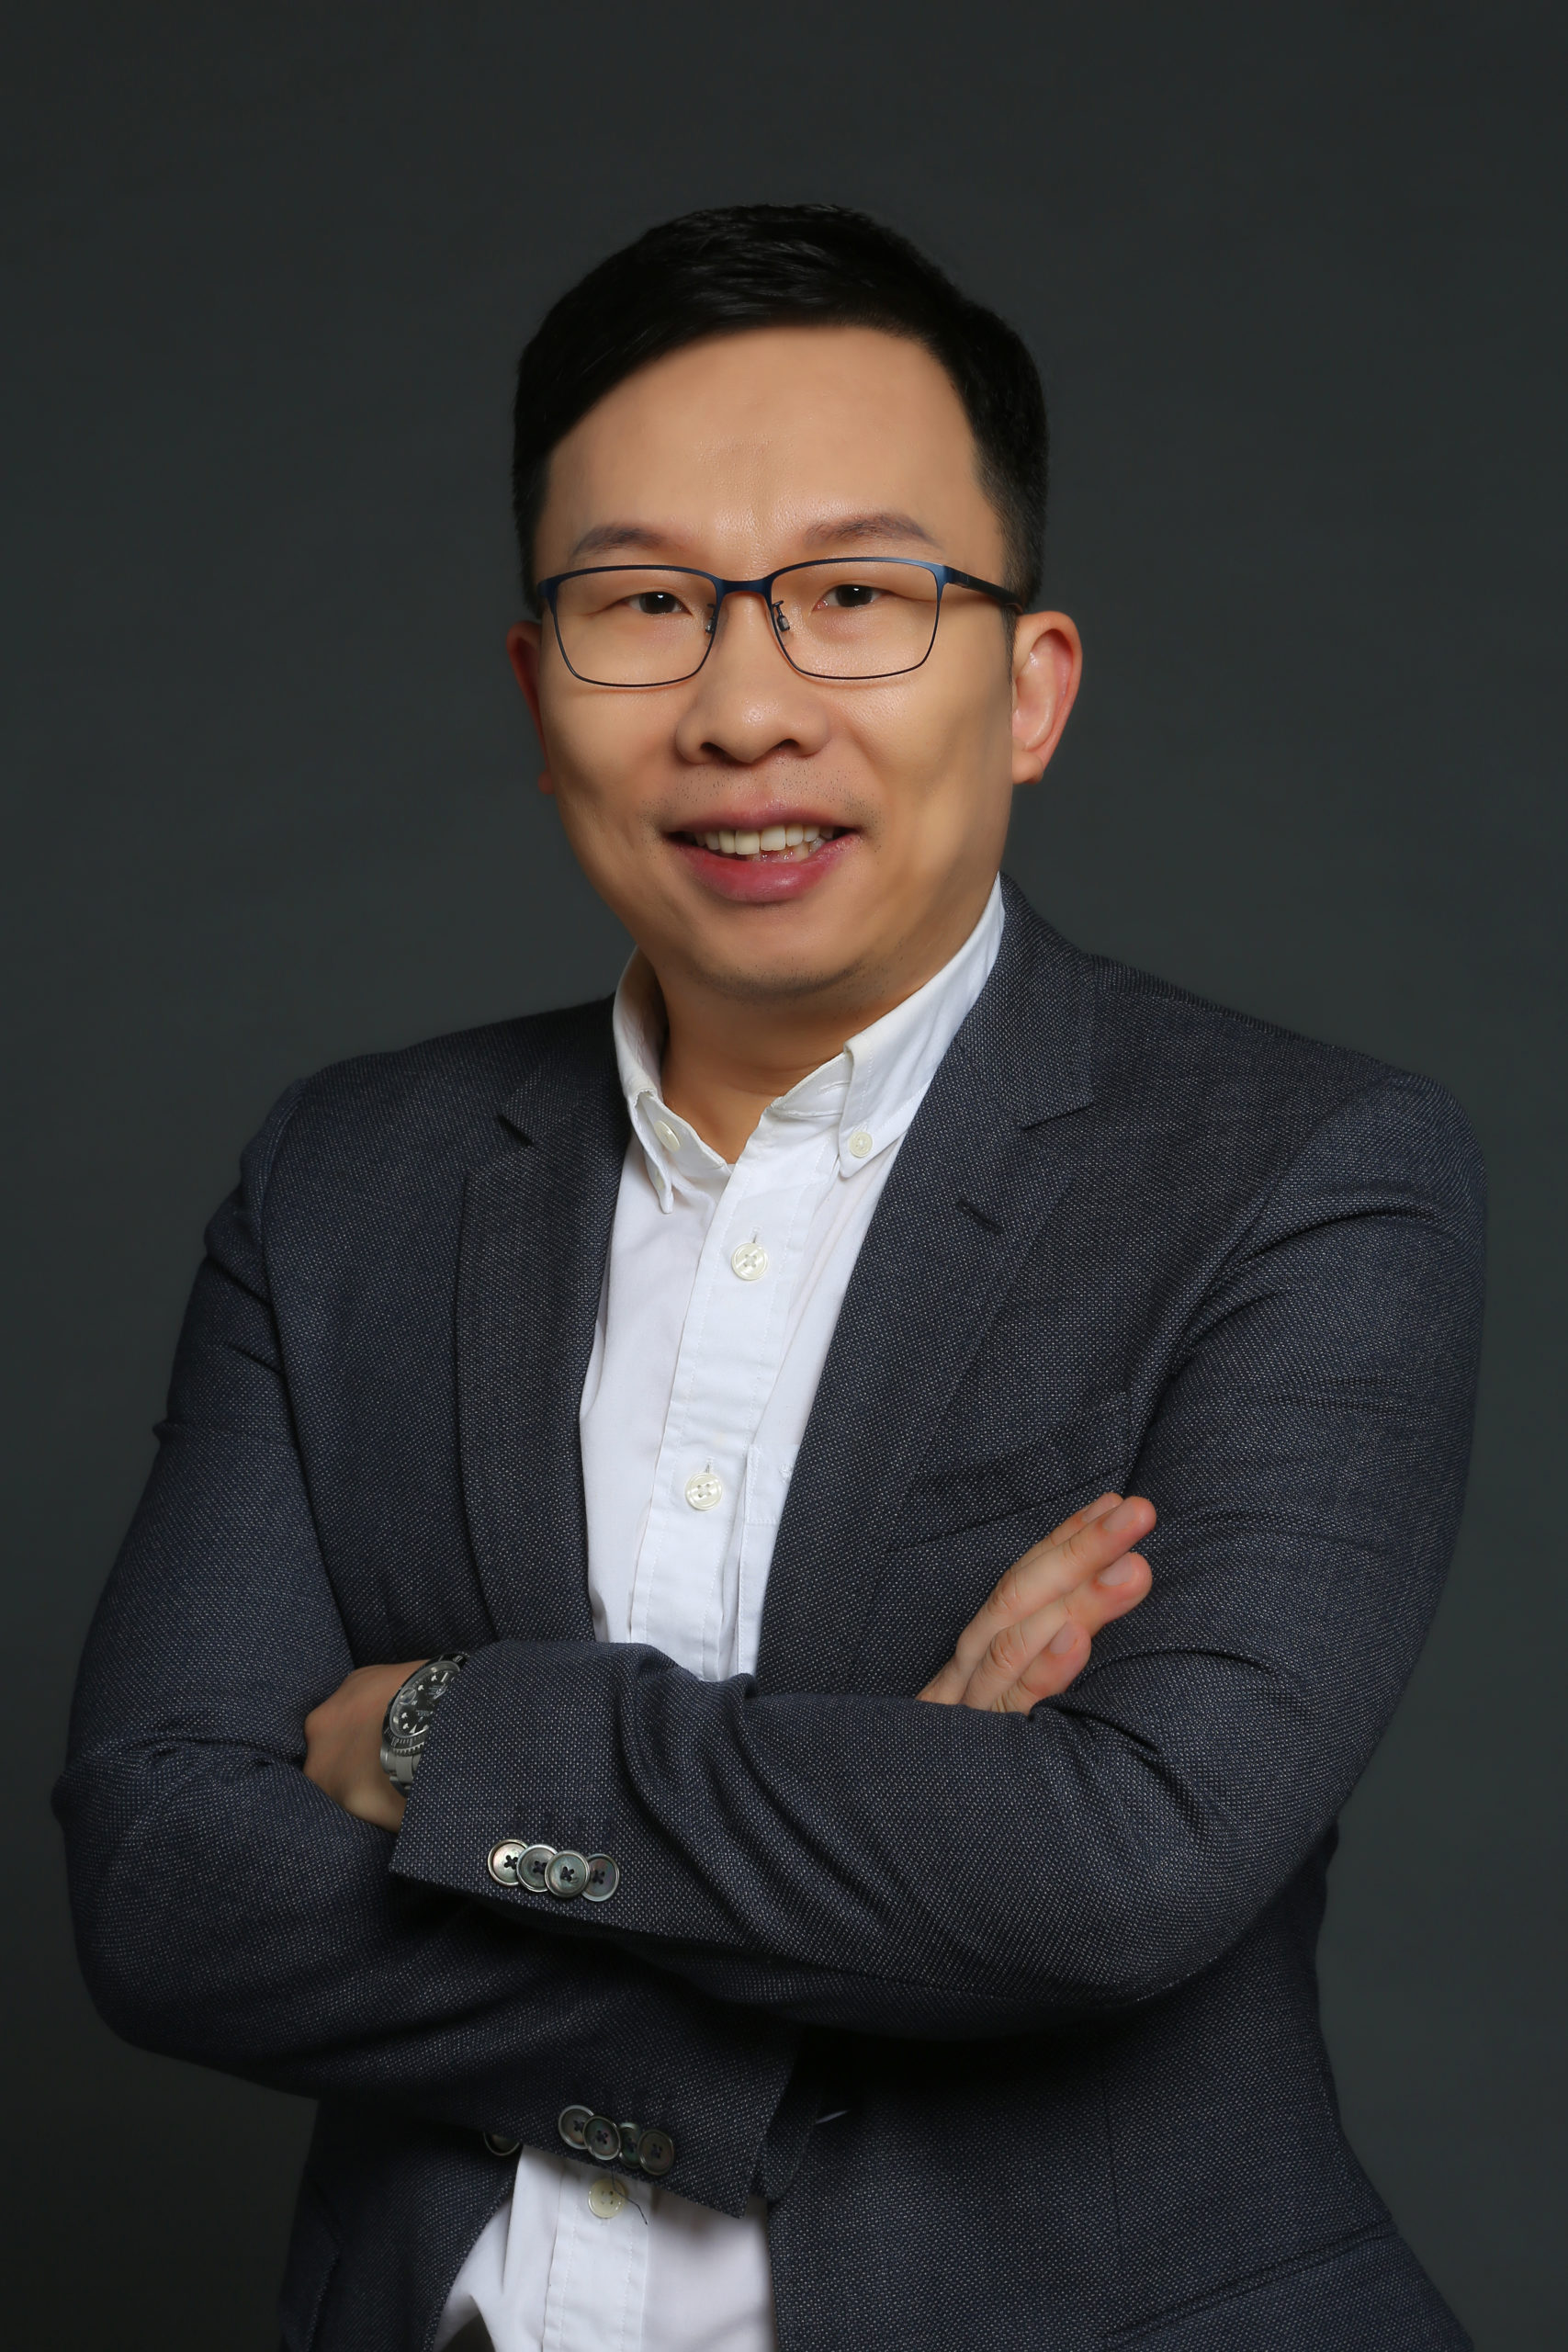 Head of JD Logistics AI and Data Science, Dr. He Tian